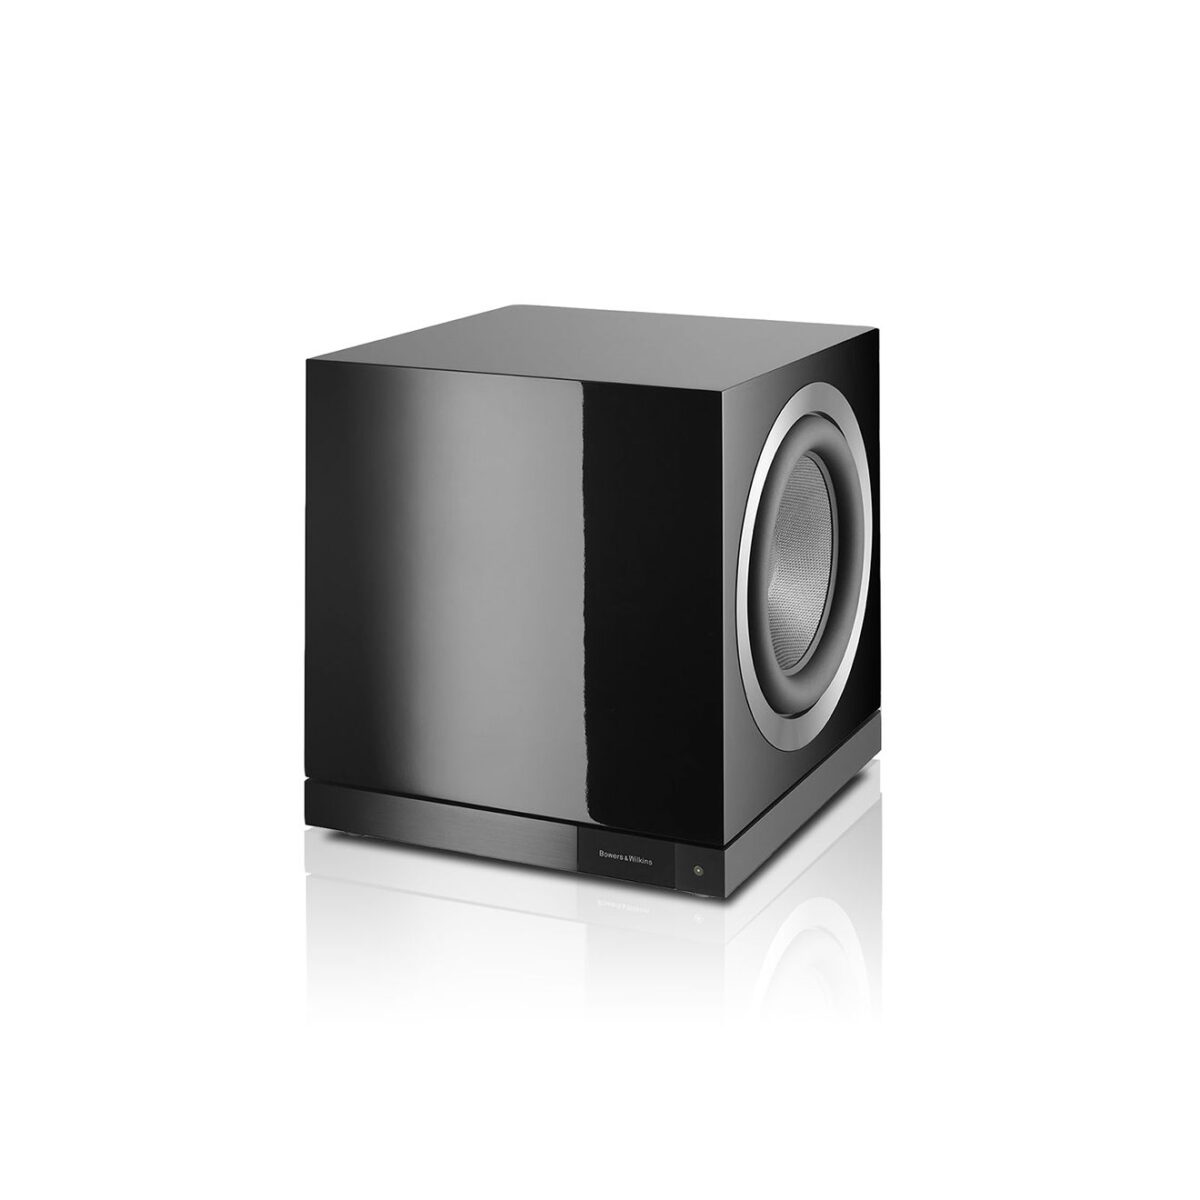 Bowers & Wilkins Subwoofer DB1